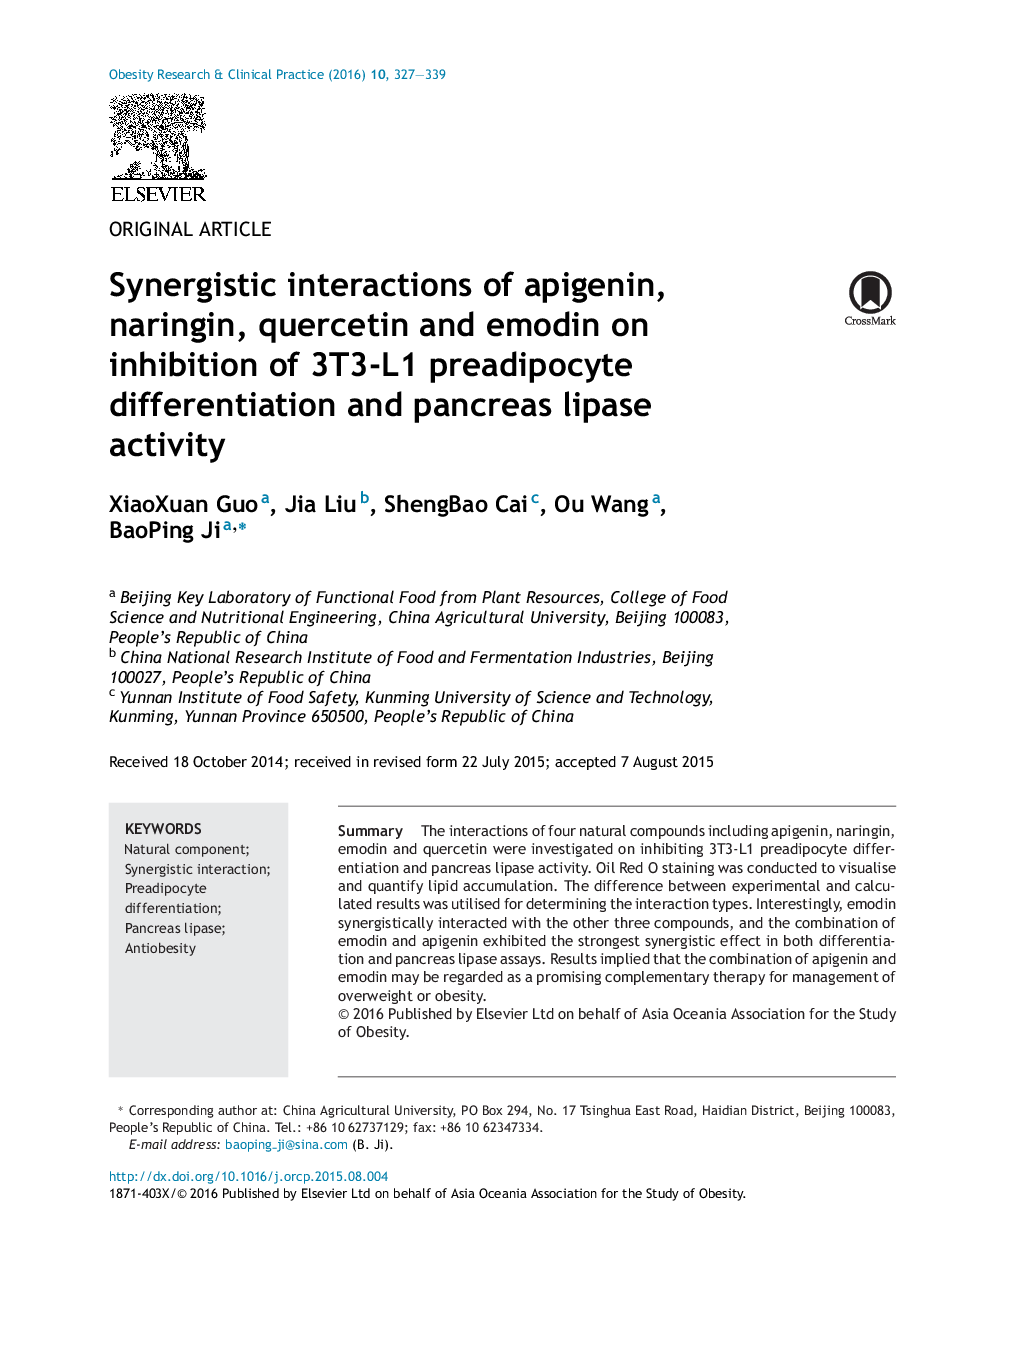 Synergistic interactions of apigenin, naringin, quercetin and emodin on inhibition of 3T3-L1 preadipocyte differentiation and pancreas lipase activity